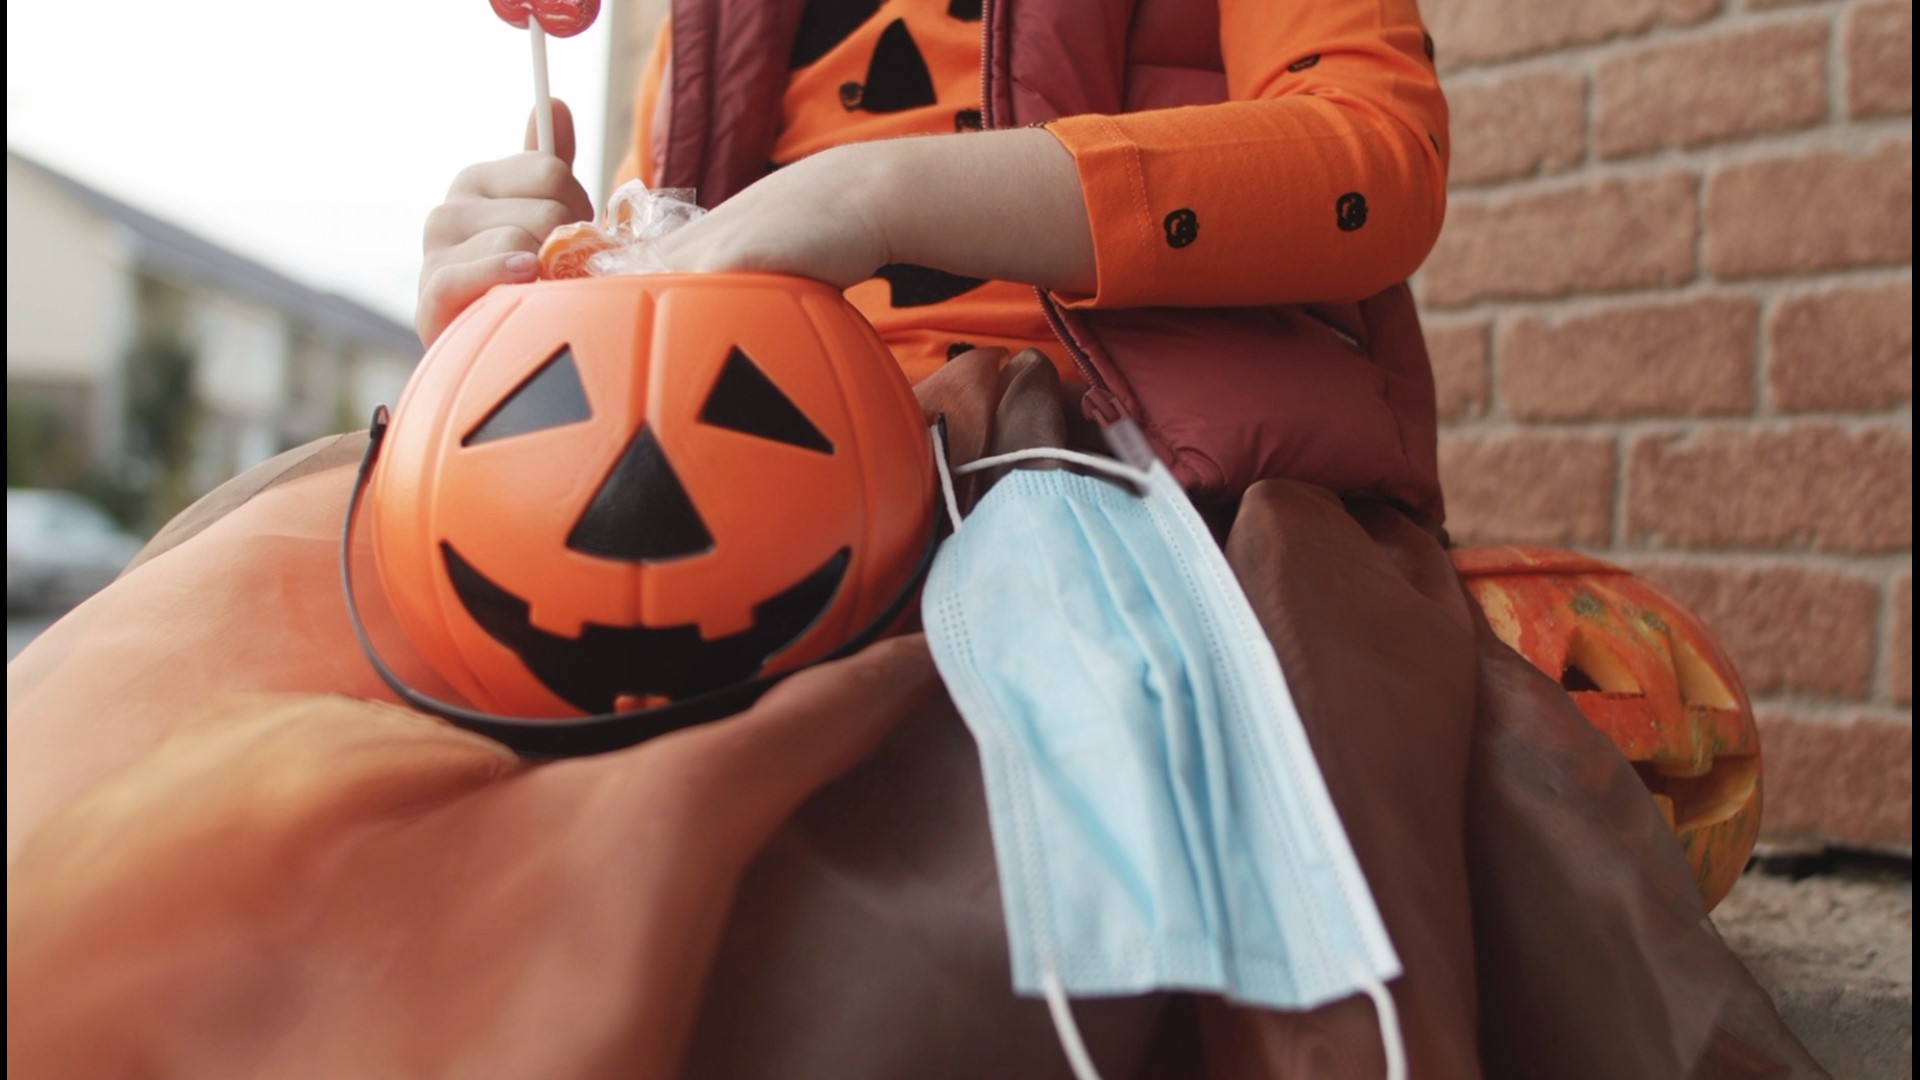 With Halloween right around the corner, it's time we get creative and find ways to honor the tradition while minimizing chances of kids and adults becoming infected. Veuer's Maria Mercedes Galuppo has the story.